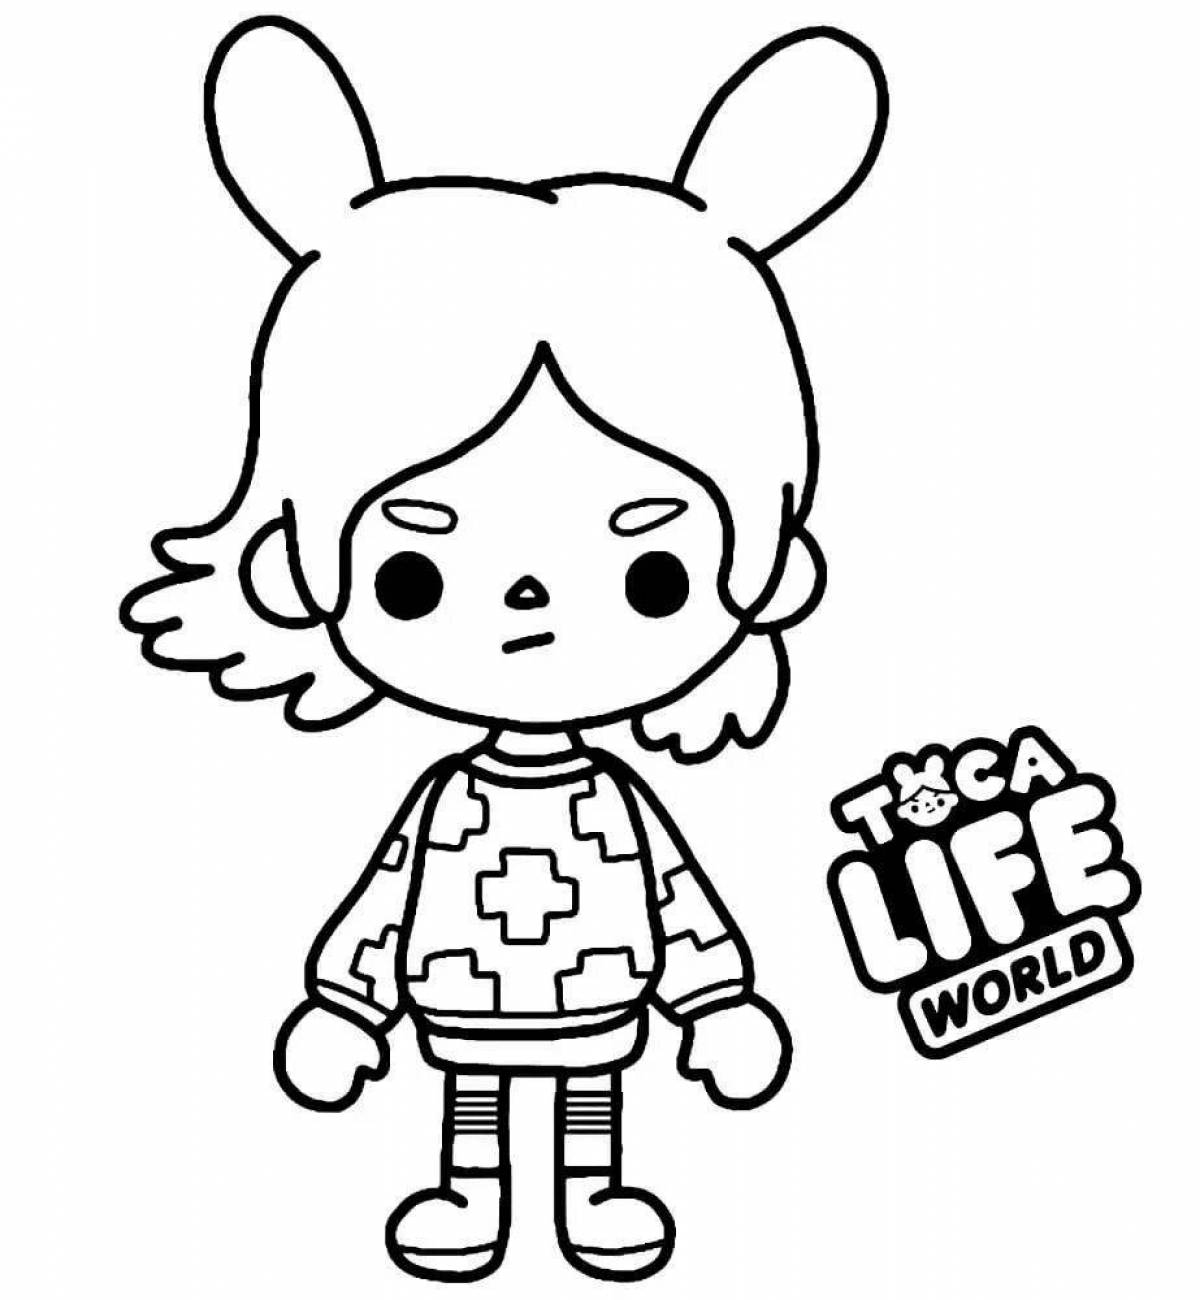 Cute side coloring pages only